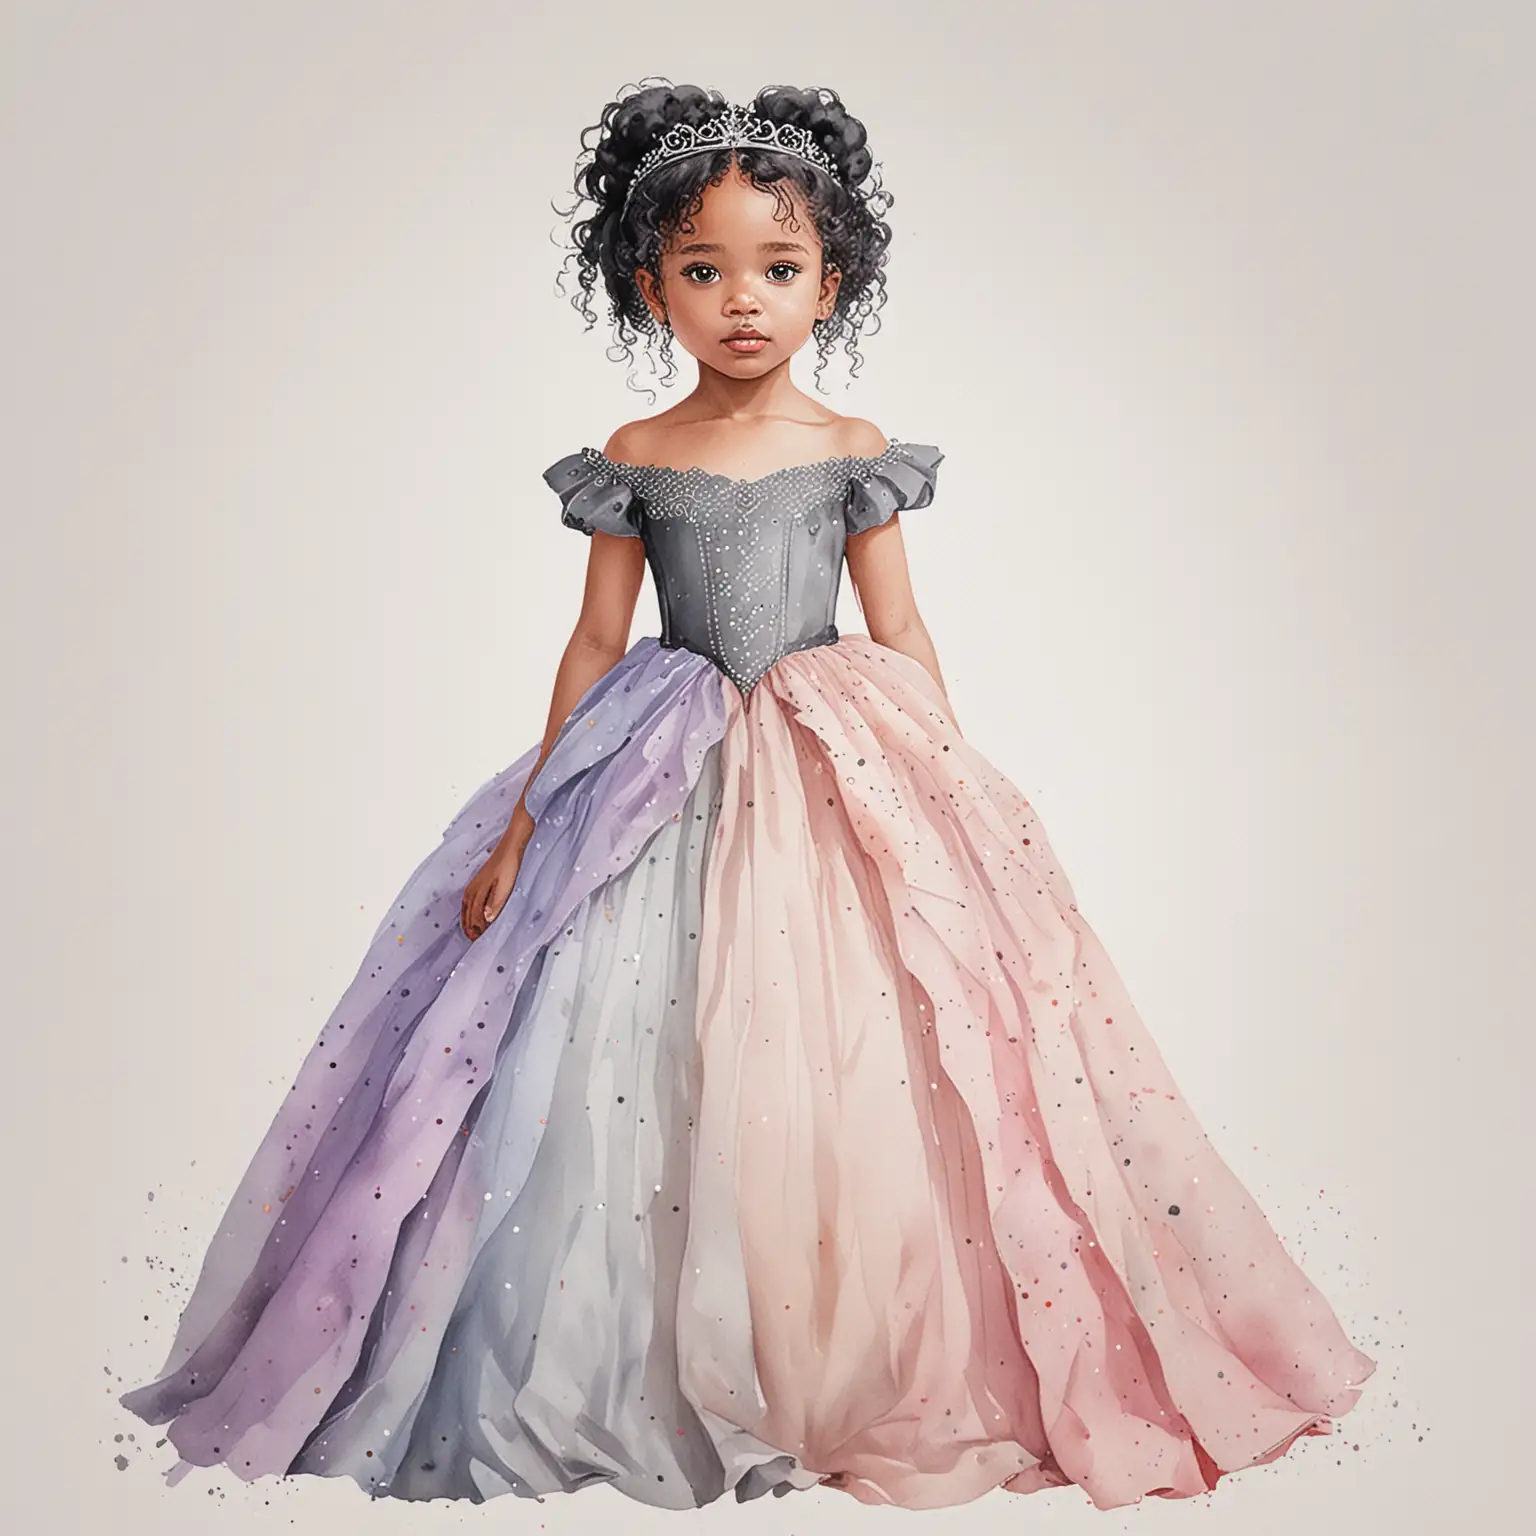 watercolor black princess with pastel princess dress with a white background